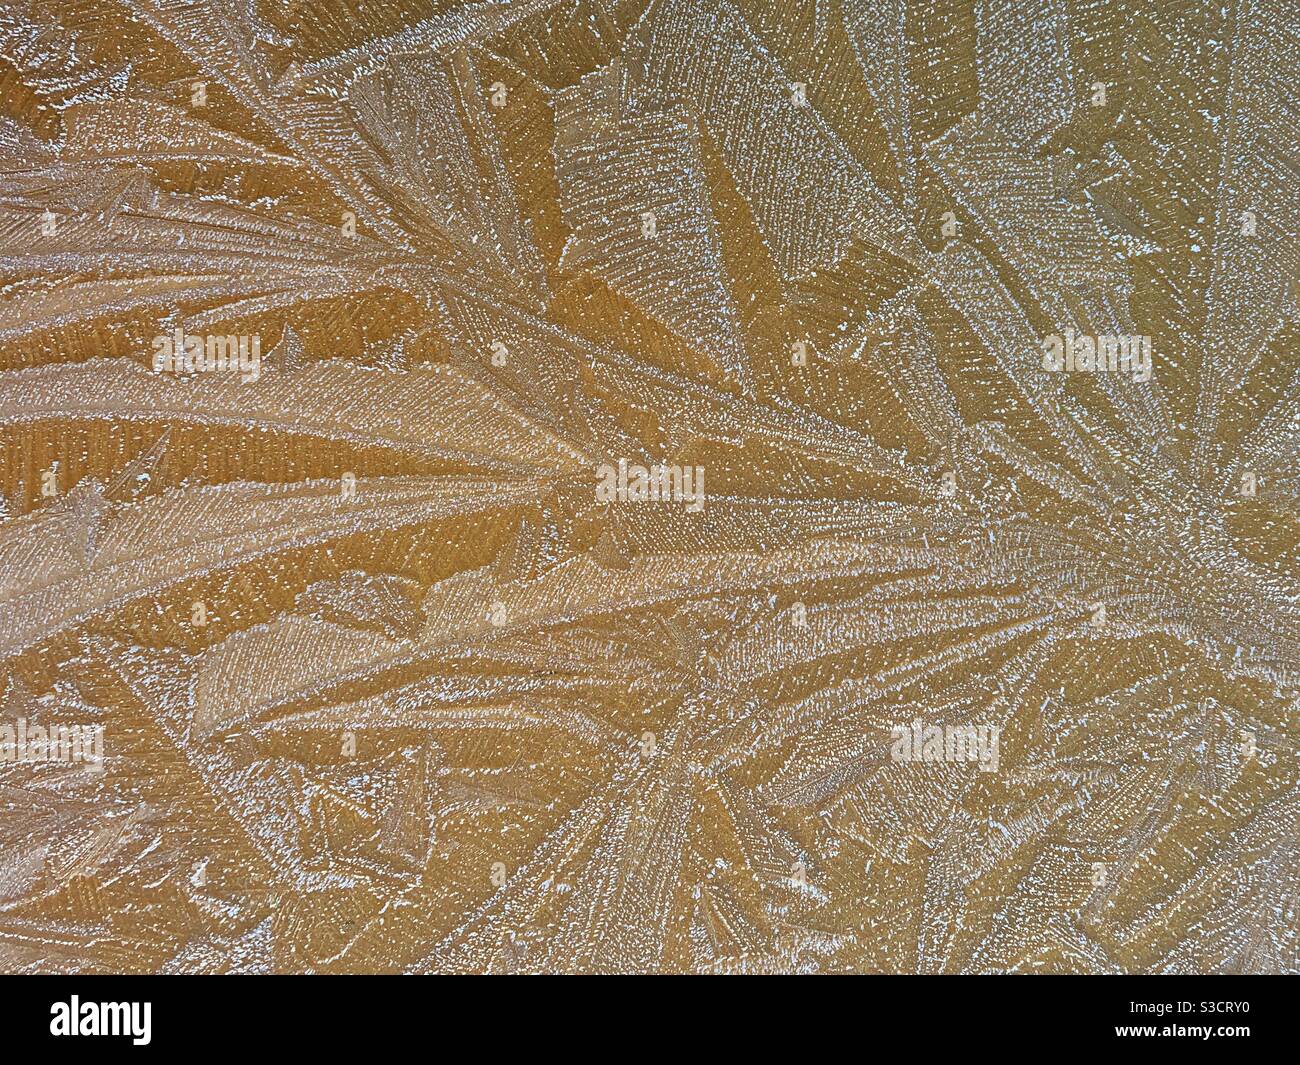 Natural abstract pattern caused by heavy frost on vehicle bonnet Stock Photo